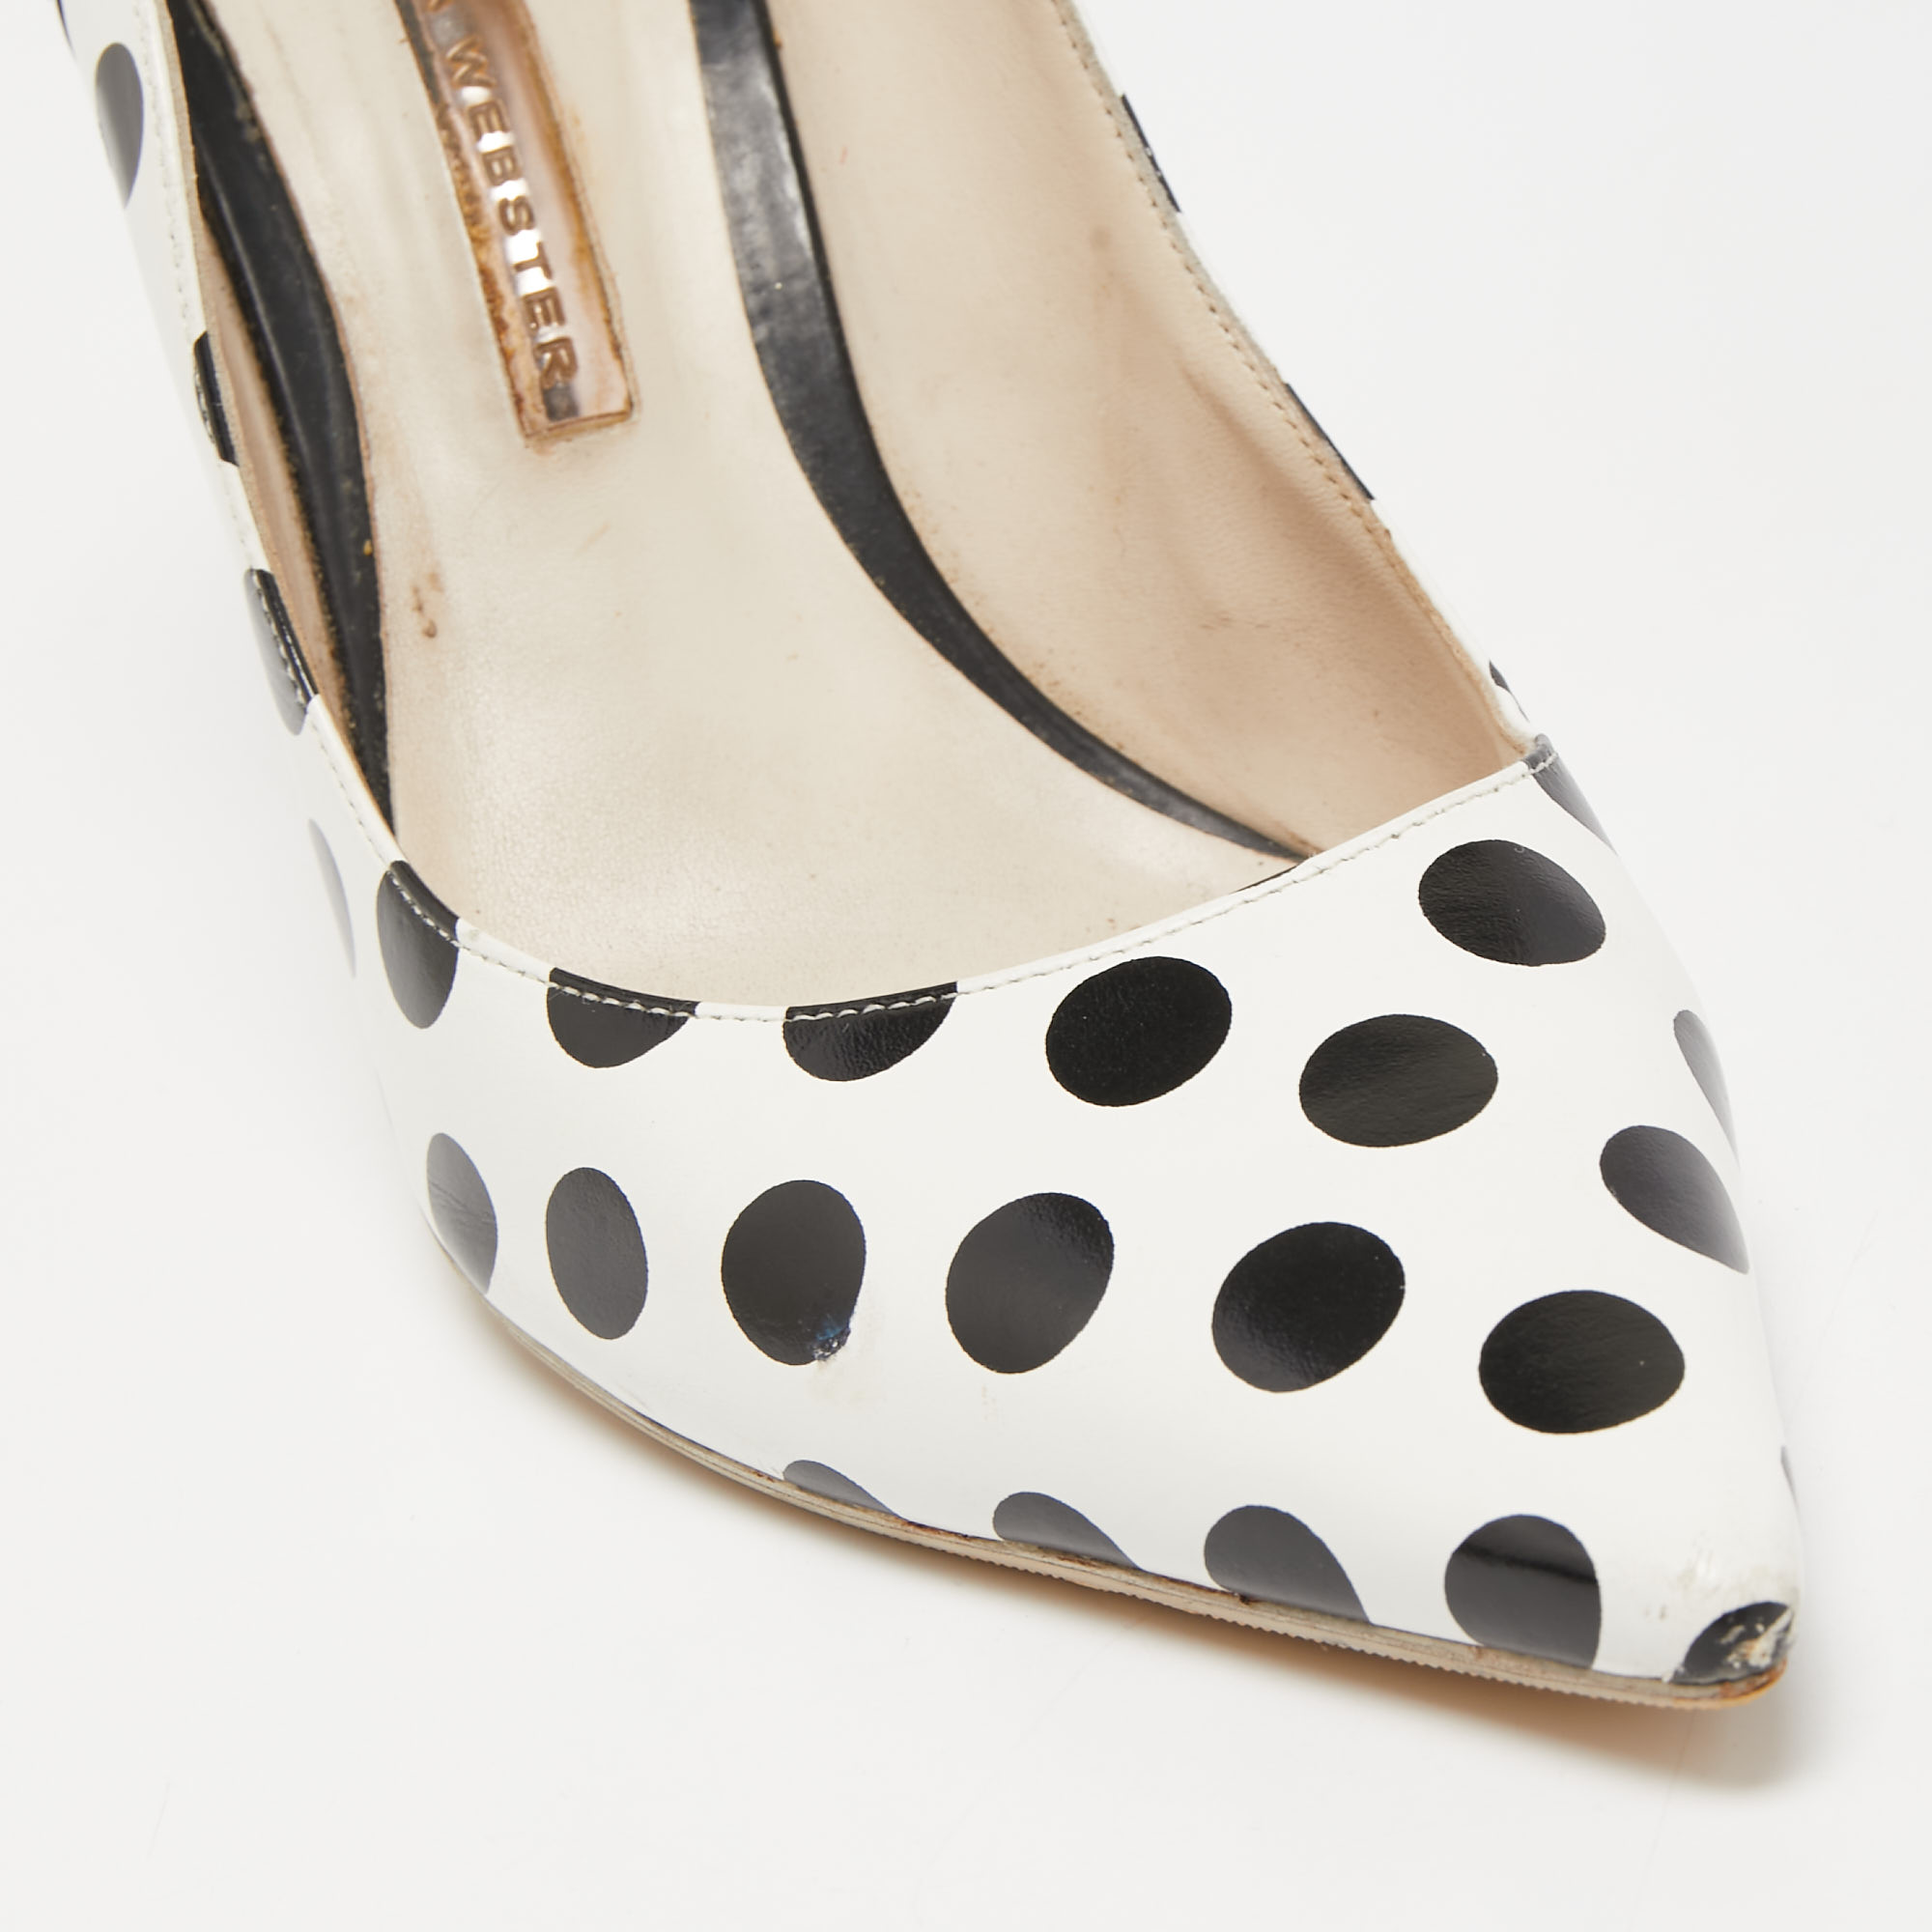 Sophia Webster Tricolor Polka Dot Leather Liberty Pointed Toe Pumps Size 39